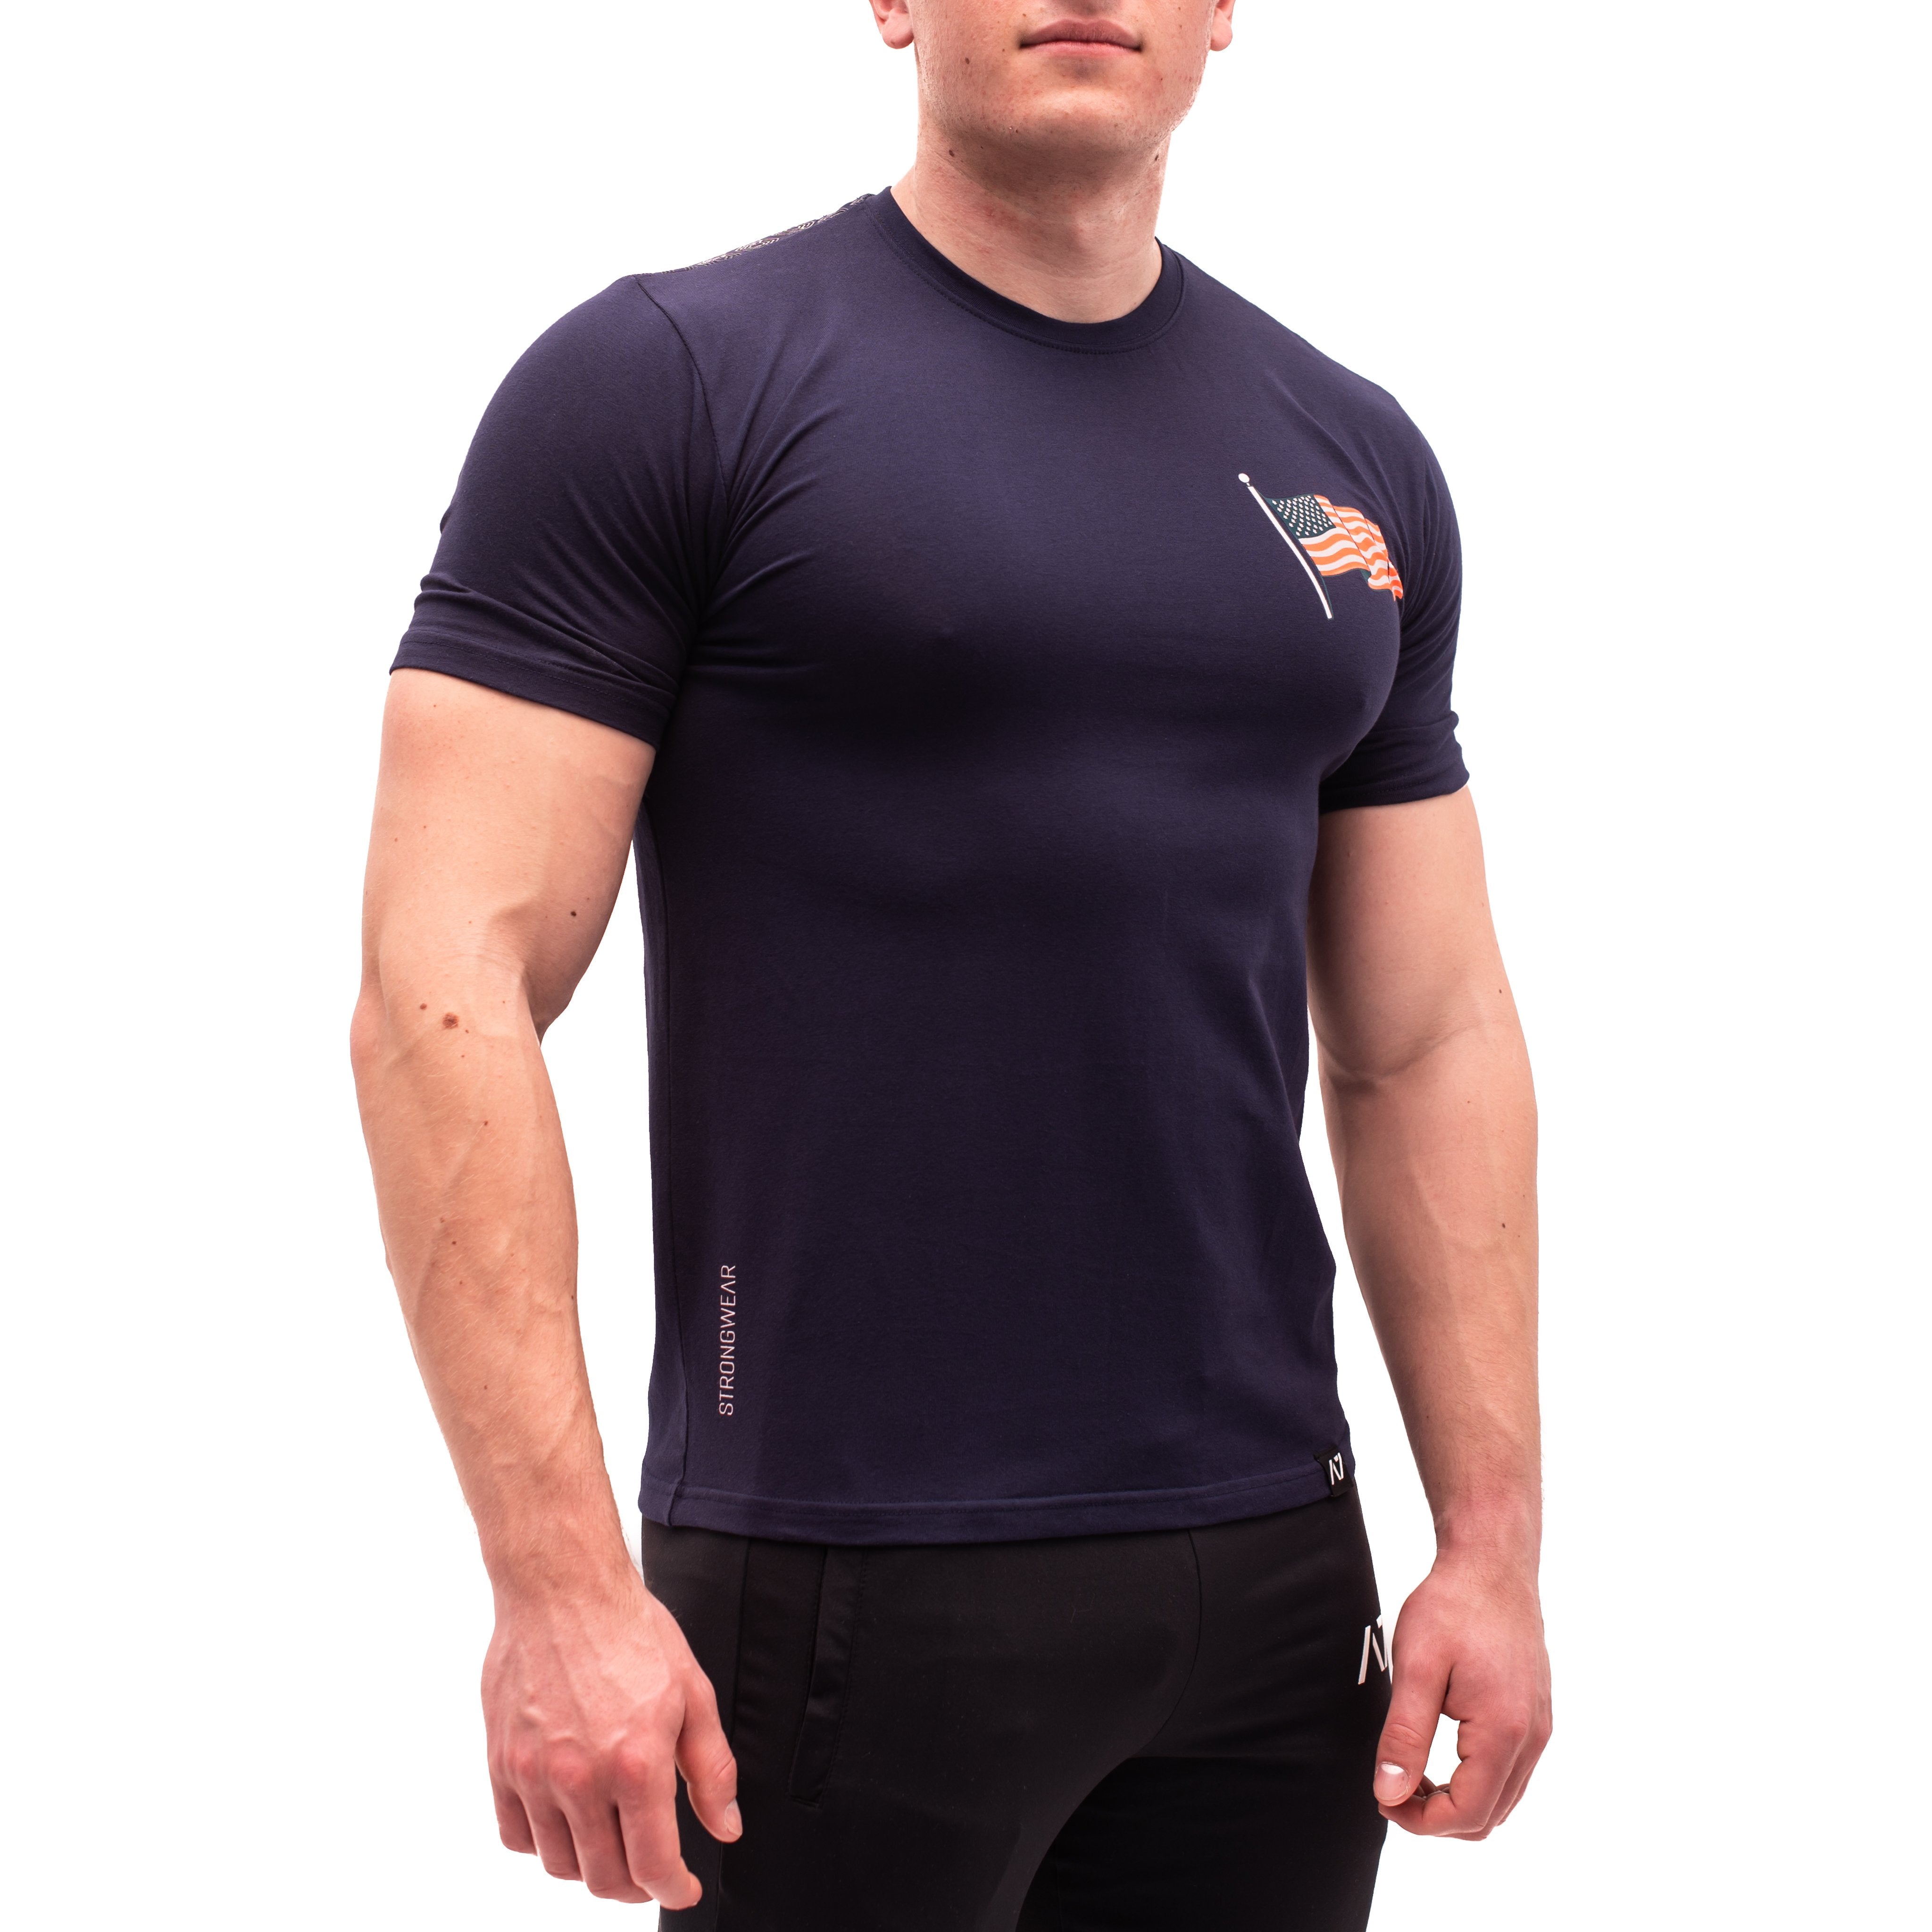 Patriot Wave Bar Grip T-shirt, great as a squat shirt. Purchase Stealth Bar Grip tshirt UK from A7 UK. Purchase Patriot Wave Bar Grip Shirt Europe from A7 UK. No more chalk and no more sliding. Best Bar Grip Tshirts, shipping to UK and Europe from A7 UK. The best Powerlifting apparel for all your workouts. Available in UK and Europe including France, Italy, Germany, Sweden and Poland